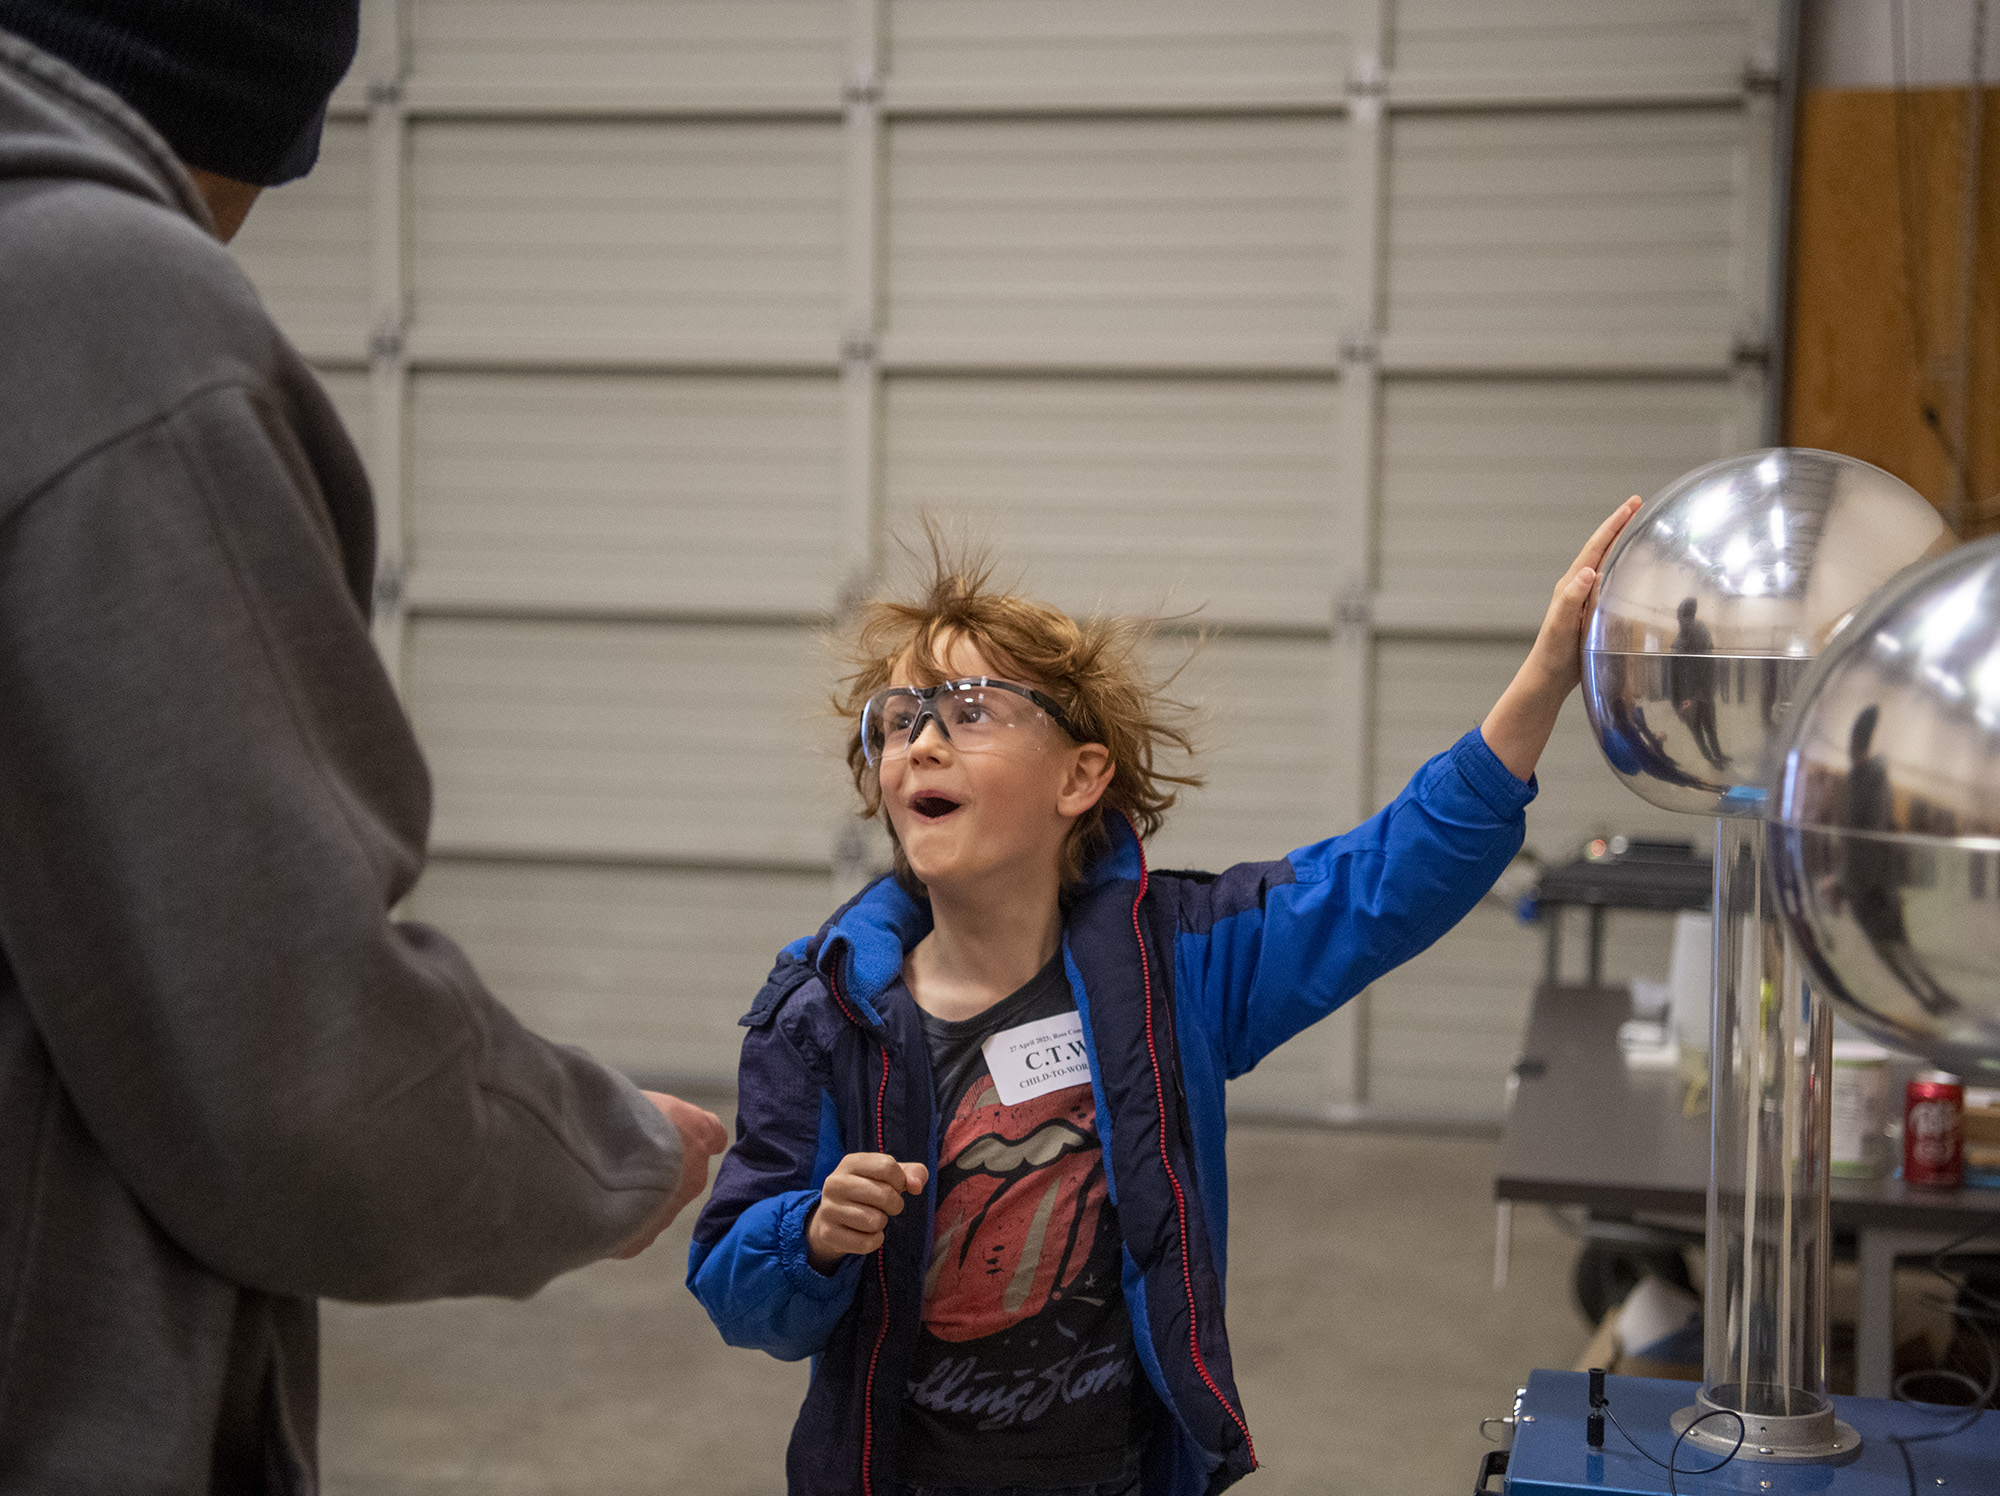 &#8220;Take Your Child To Work Day&#8221; at Bonneville Power Administration&#8217;s Ross Complex photo gallery